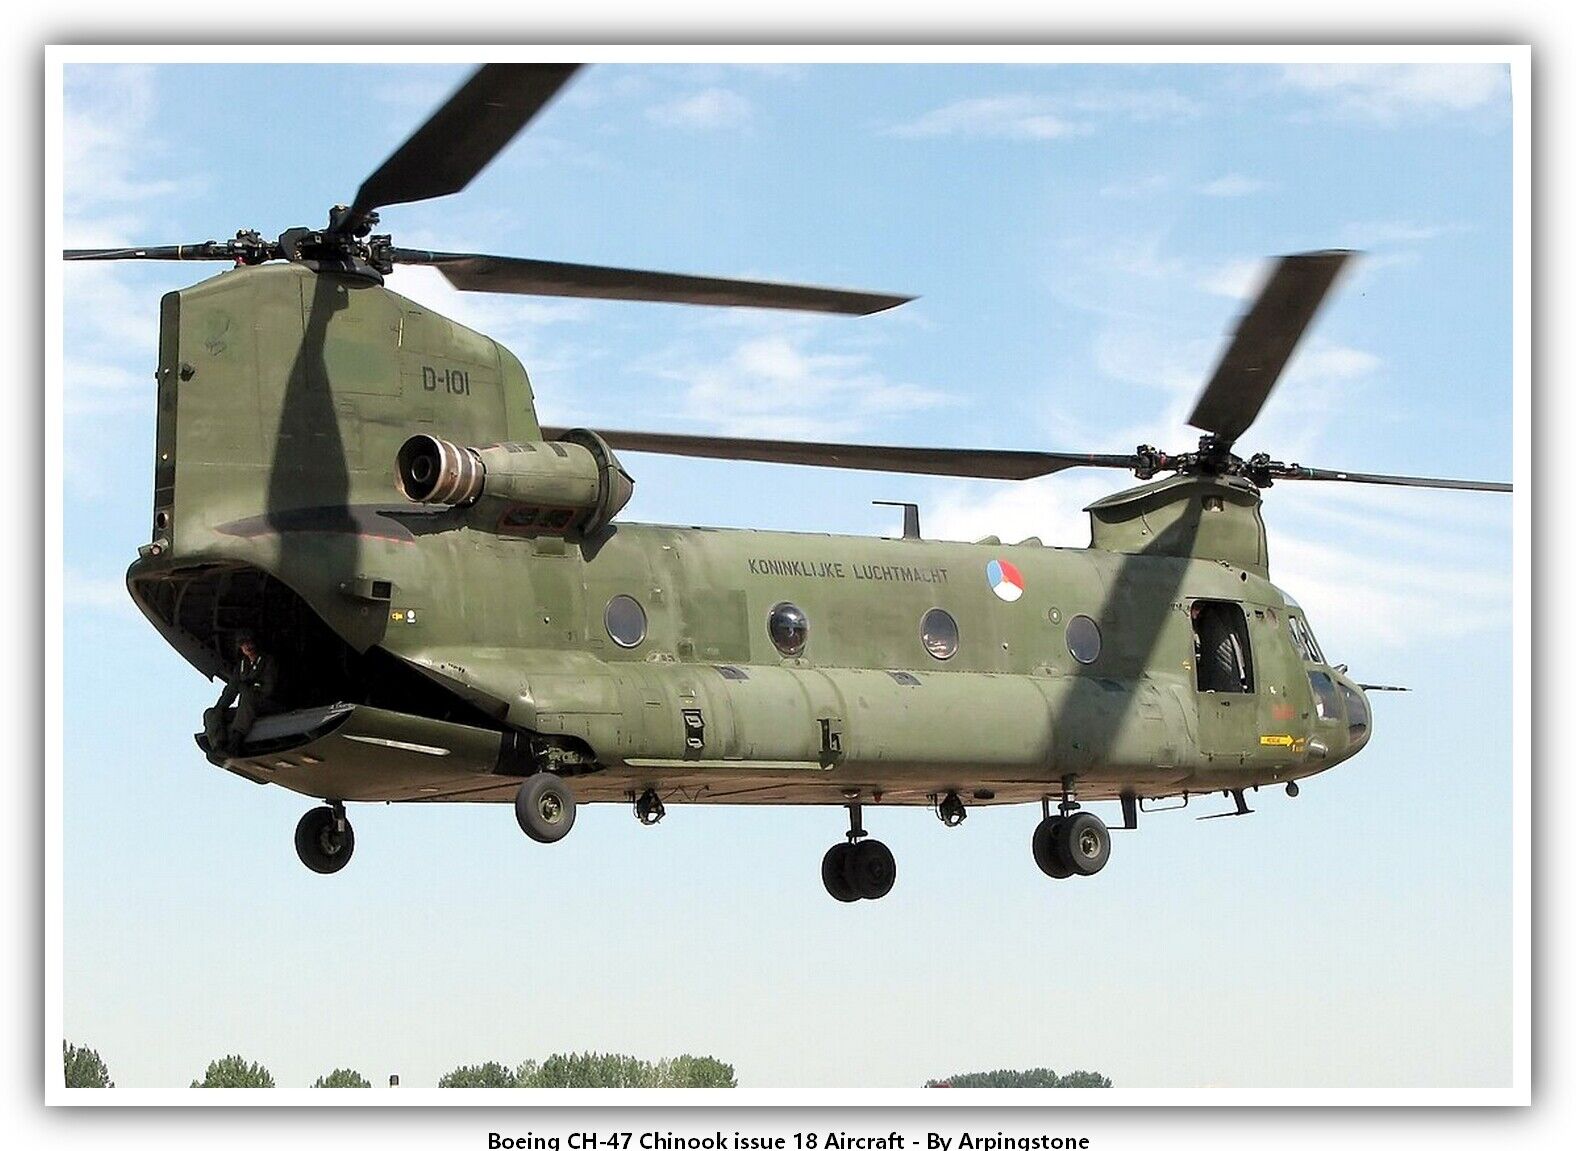 Boeing CH-47 Chinook issue 18 Aircraft